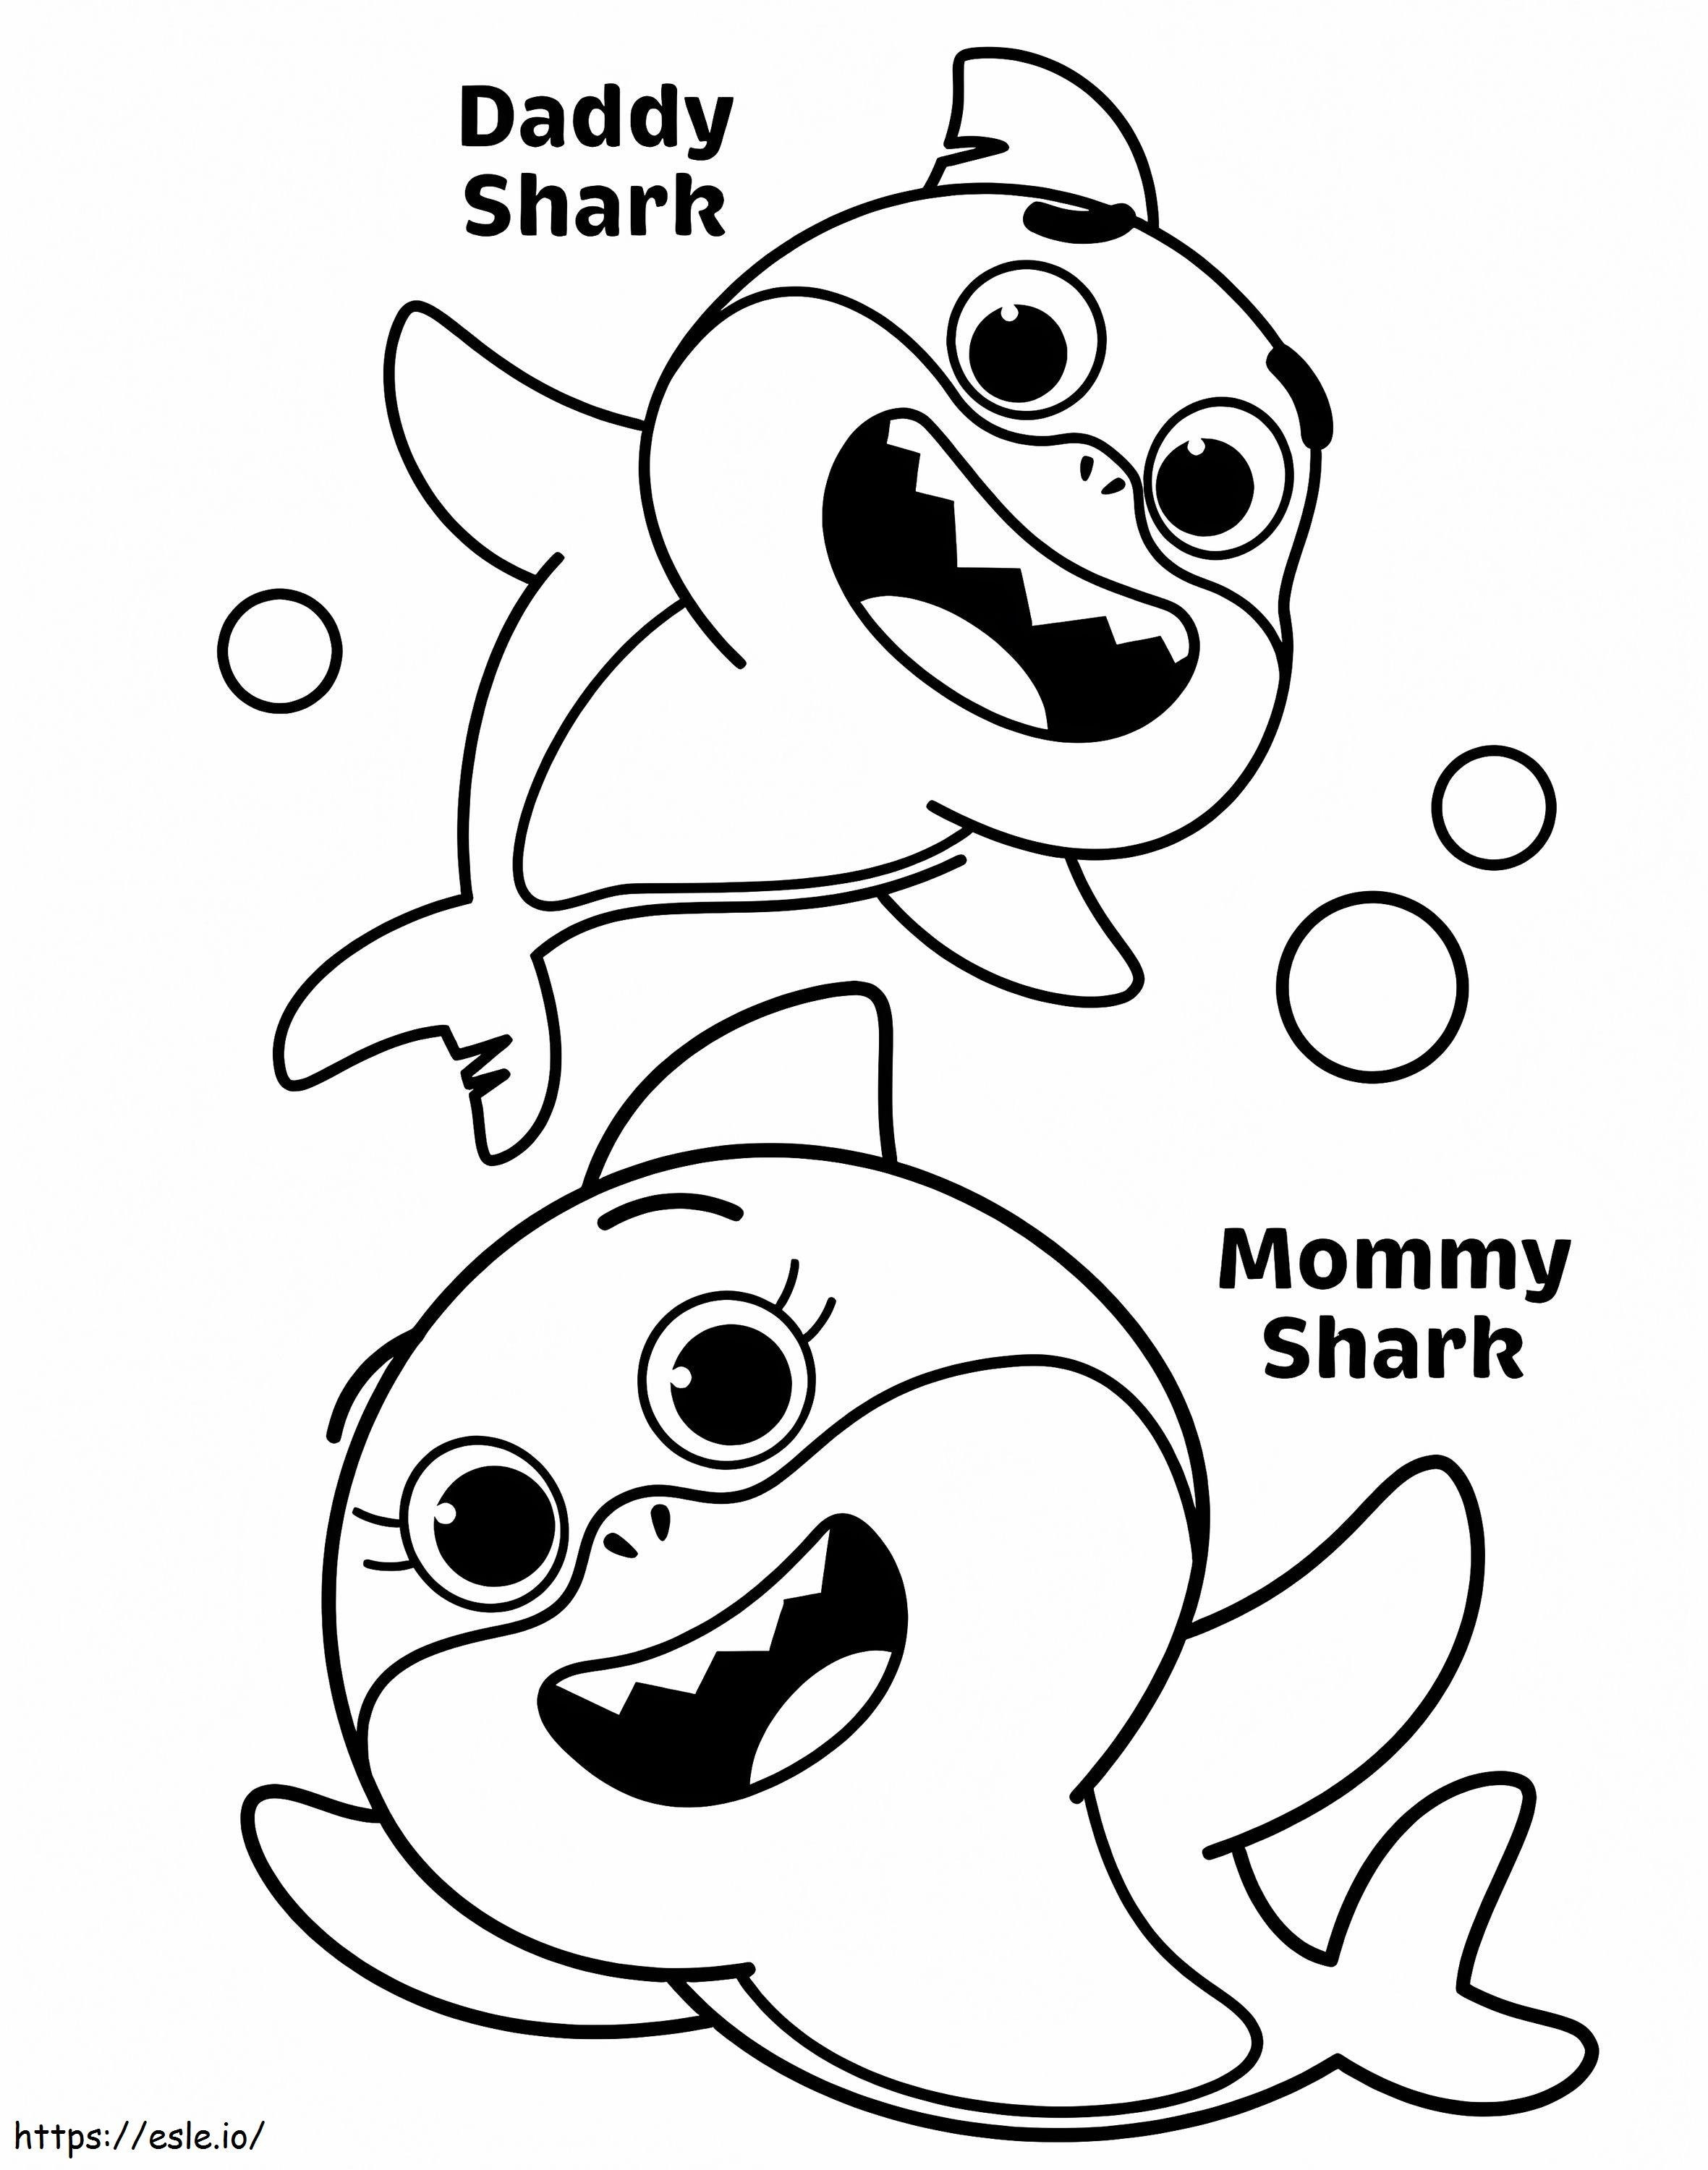 Daddy Shark And Mommy Shark coloring page